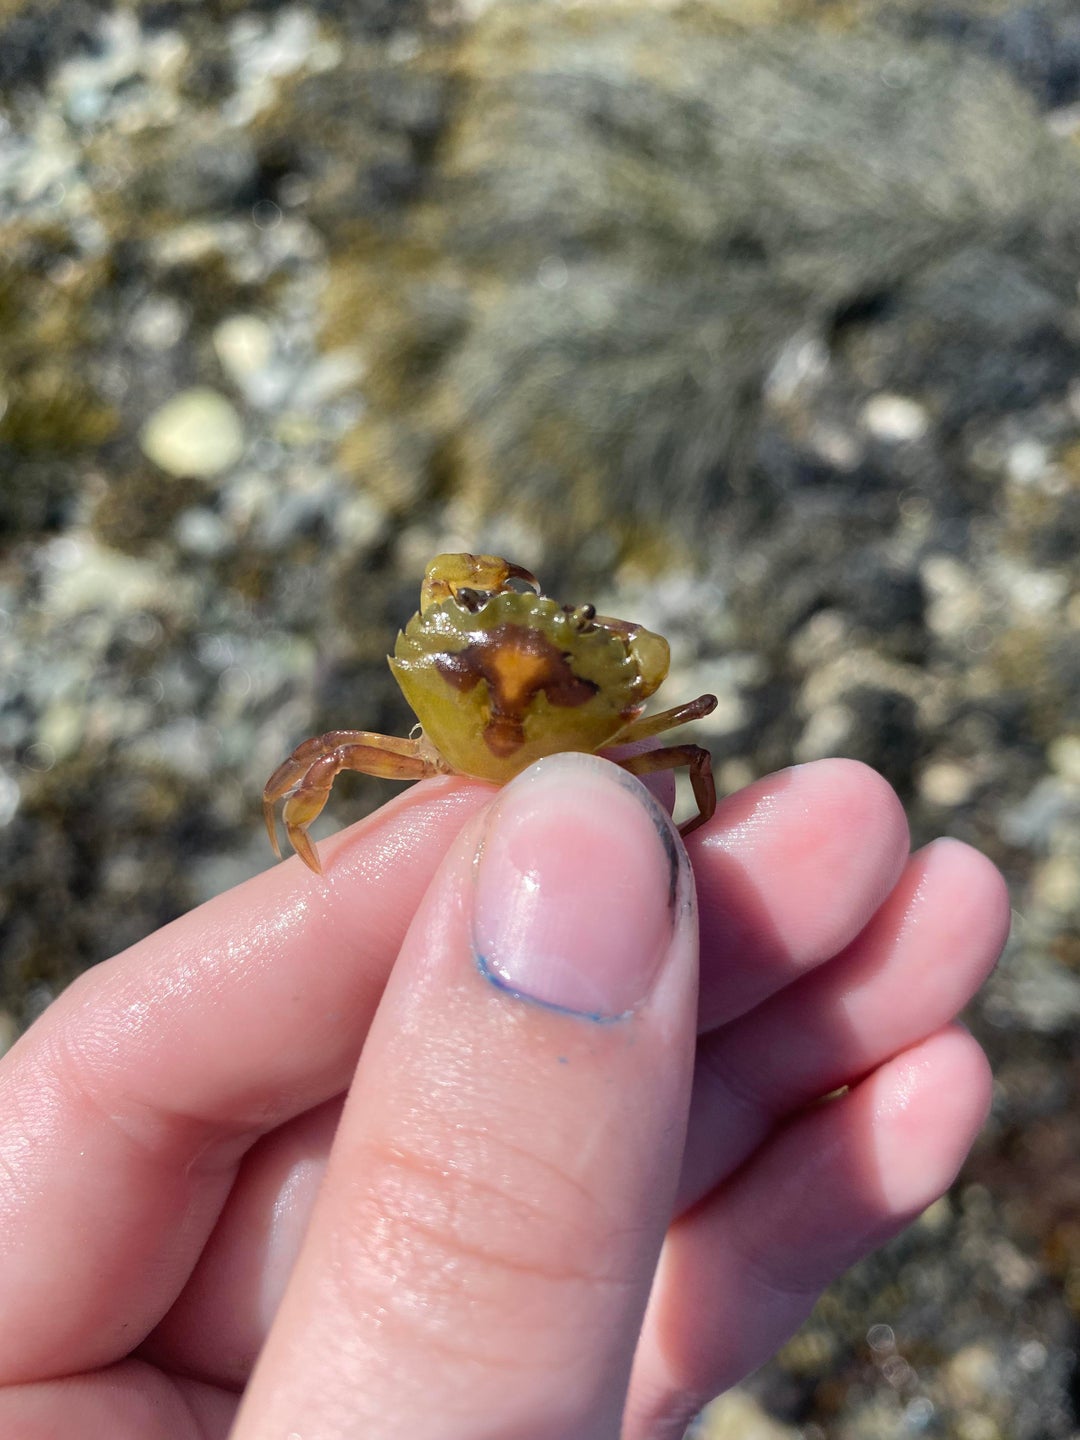 Found a tiny crab that has a cow head on its back